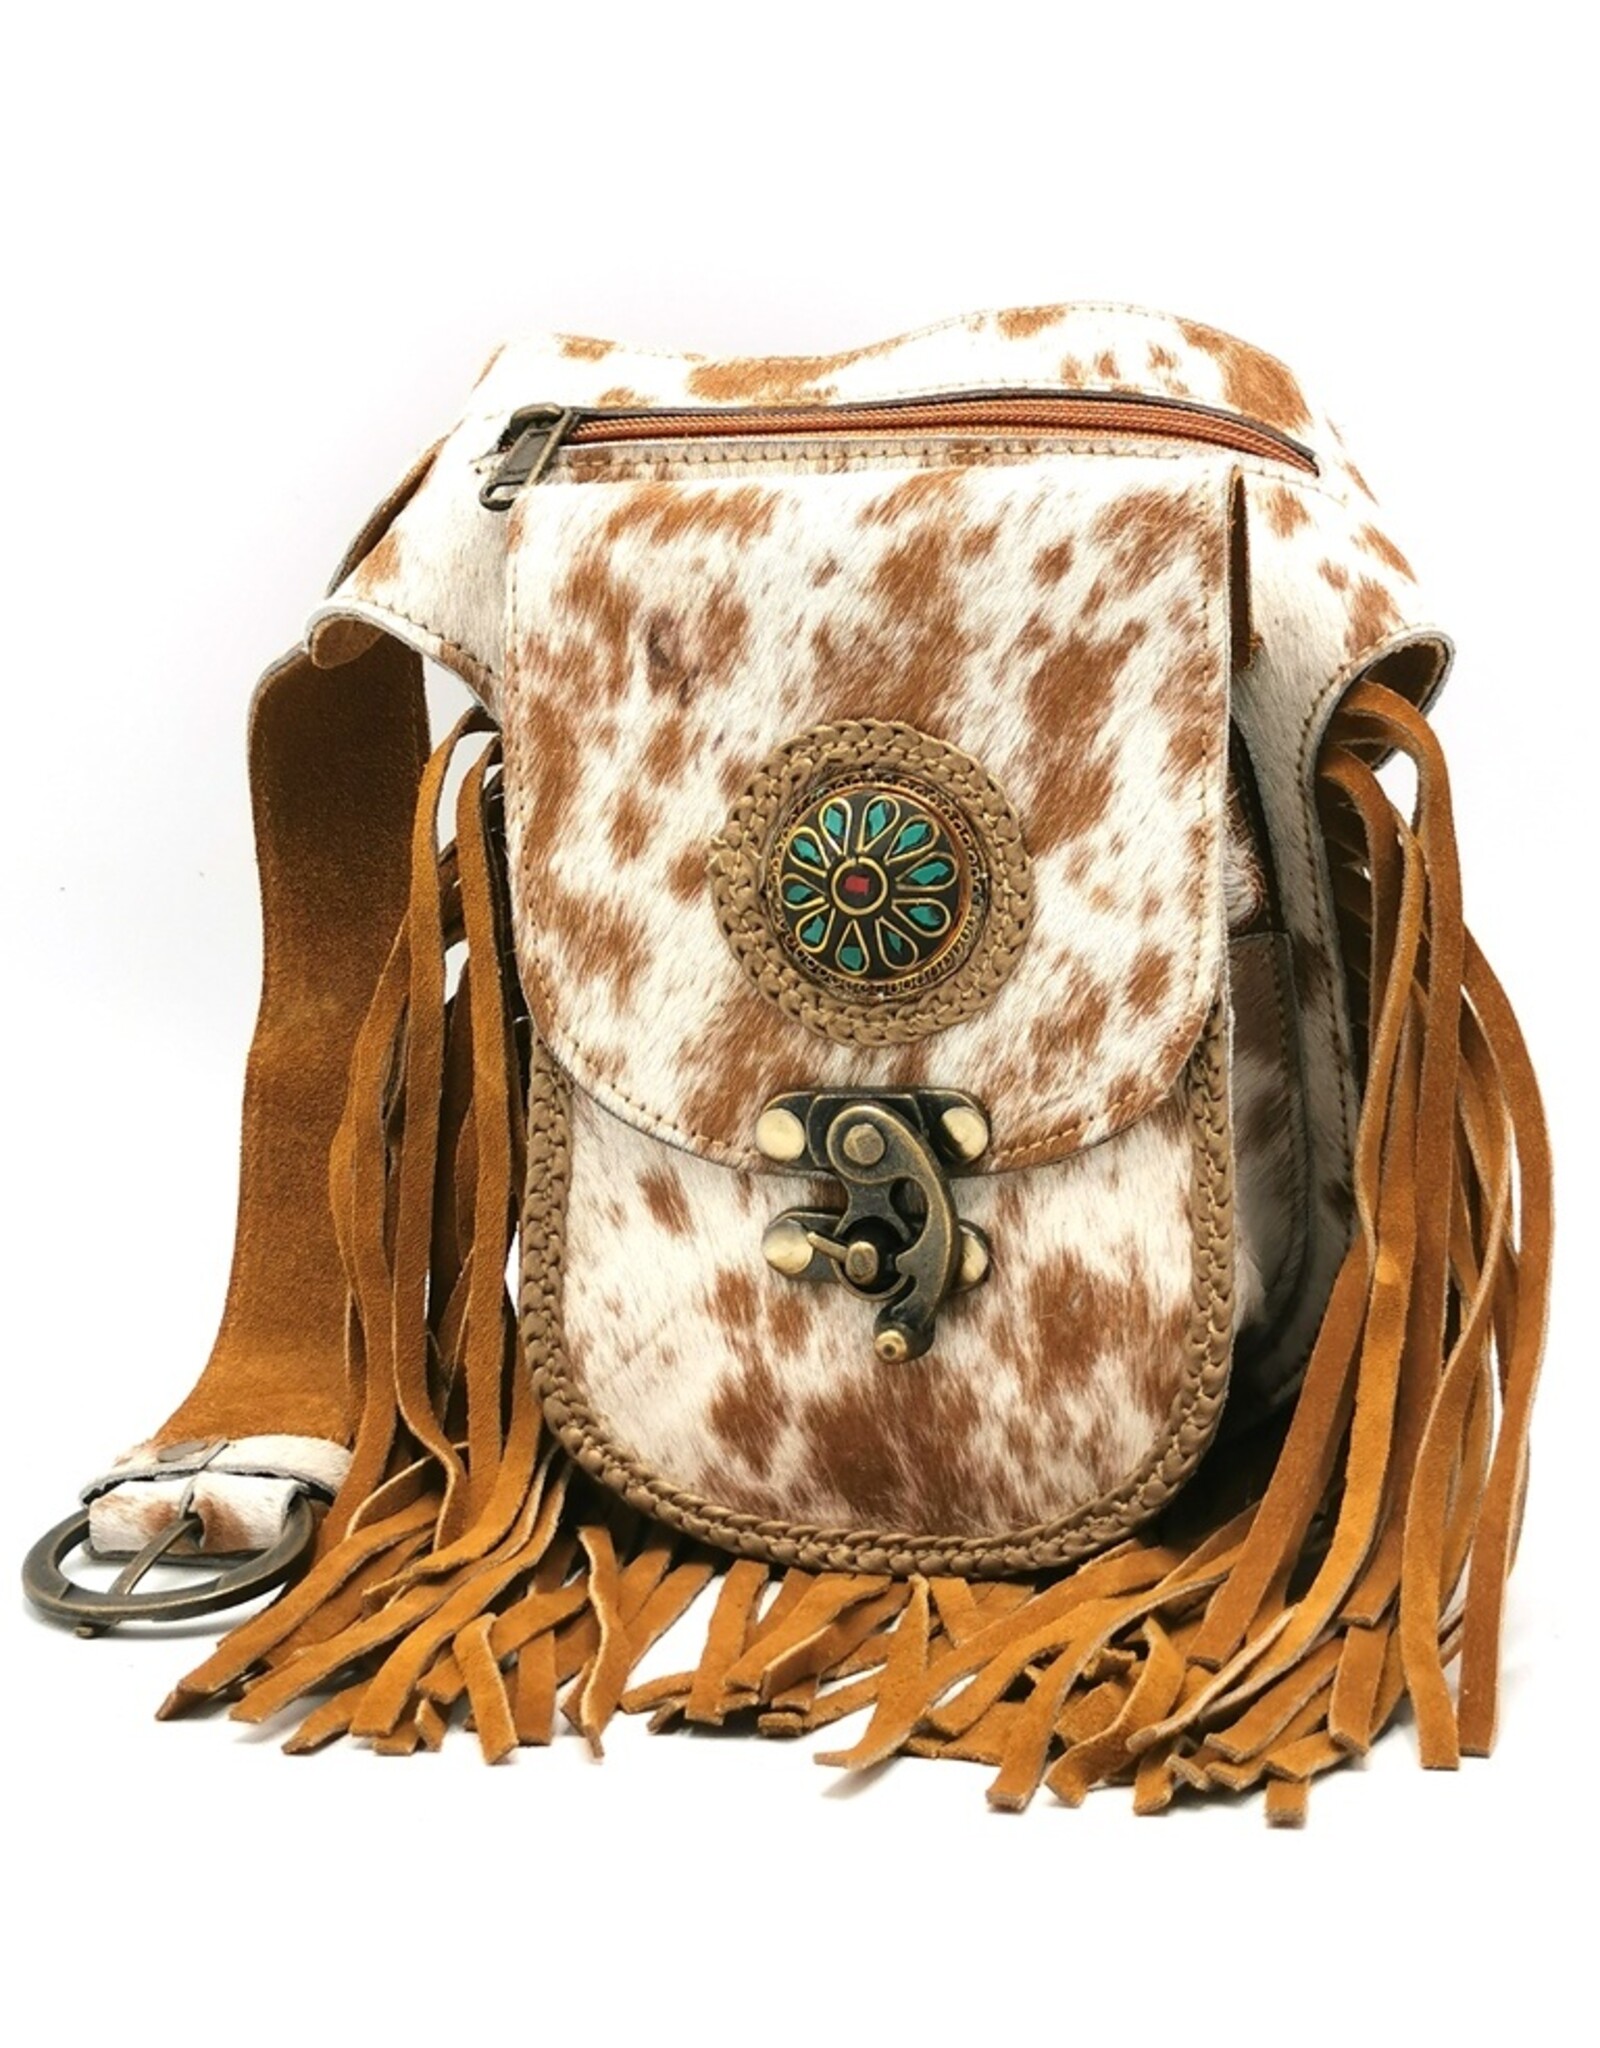 Trukado Small leather bags, clutches and more - Cowhide waist bag with fringes and hook